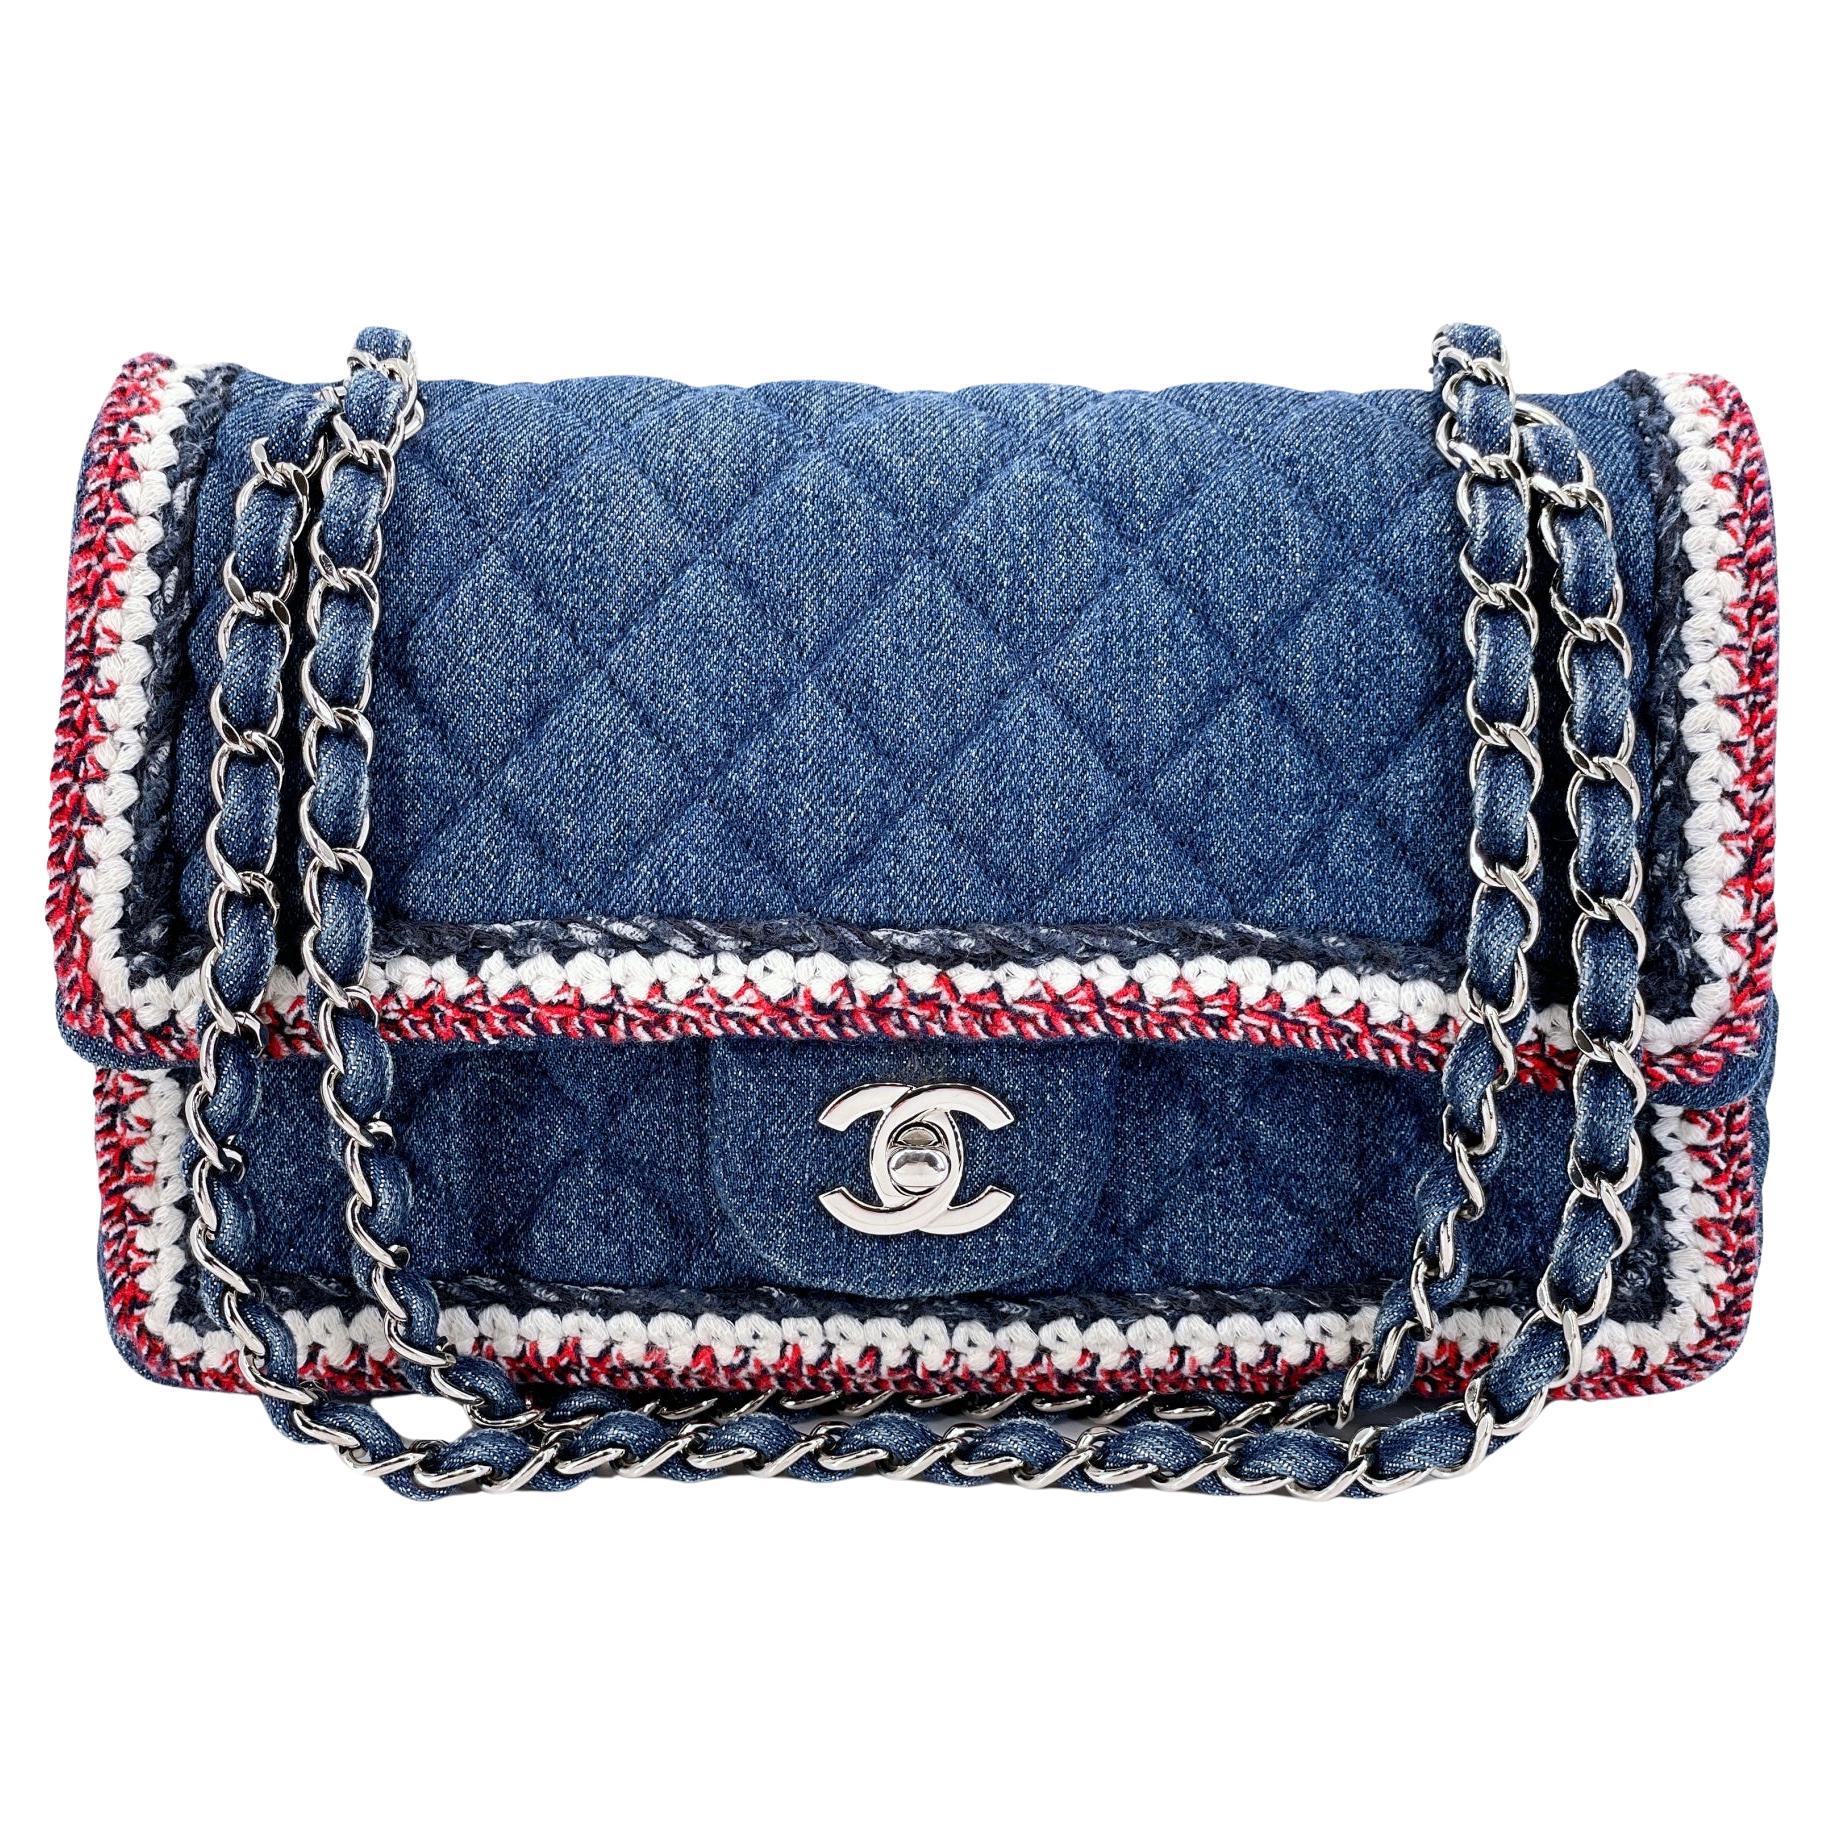 What is a Chanel VIP bag?